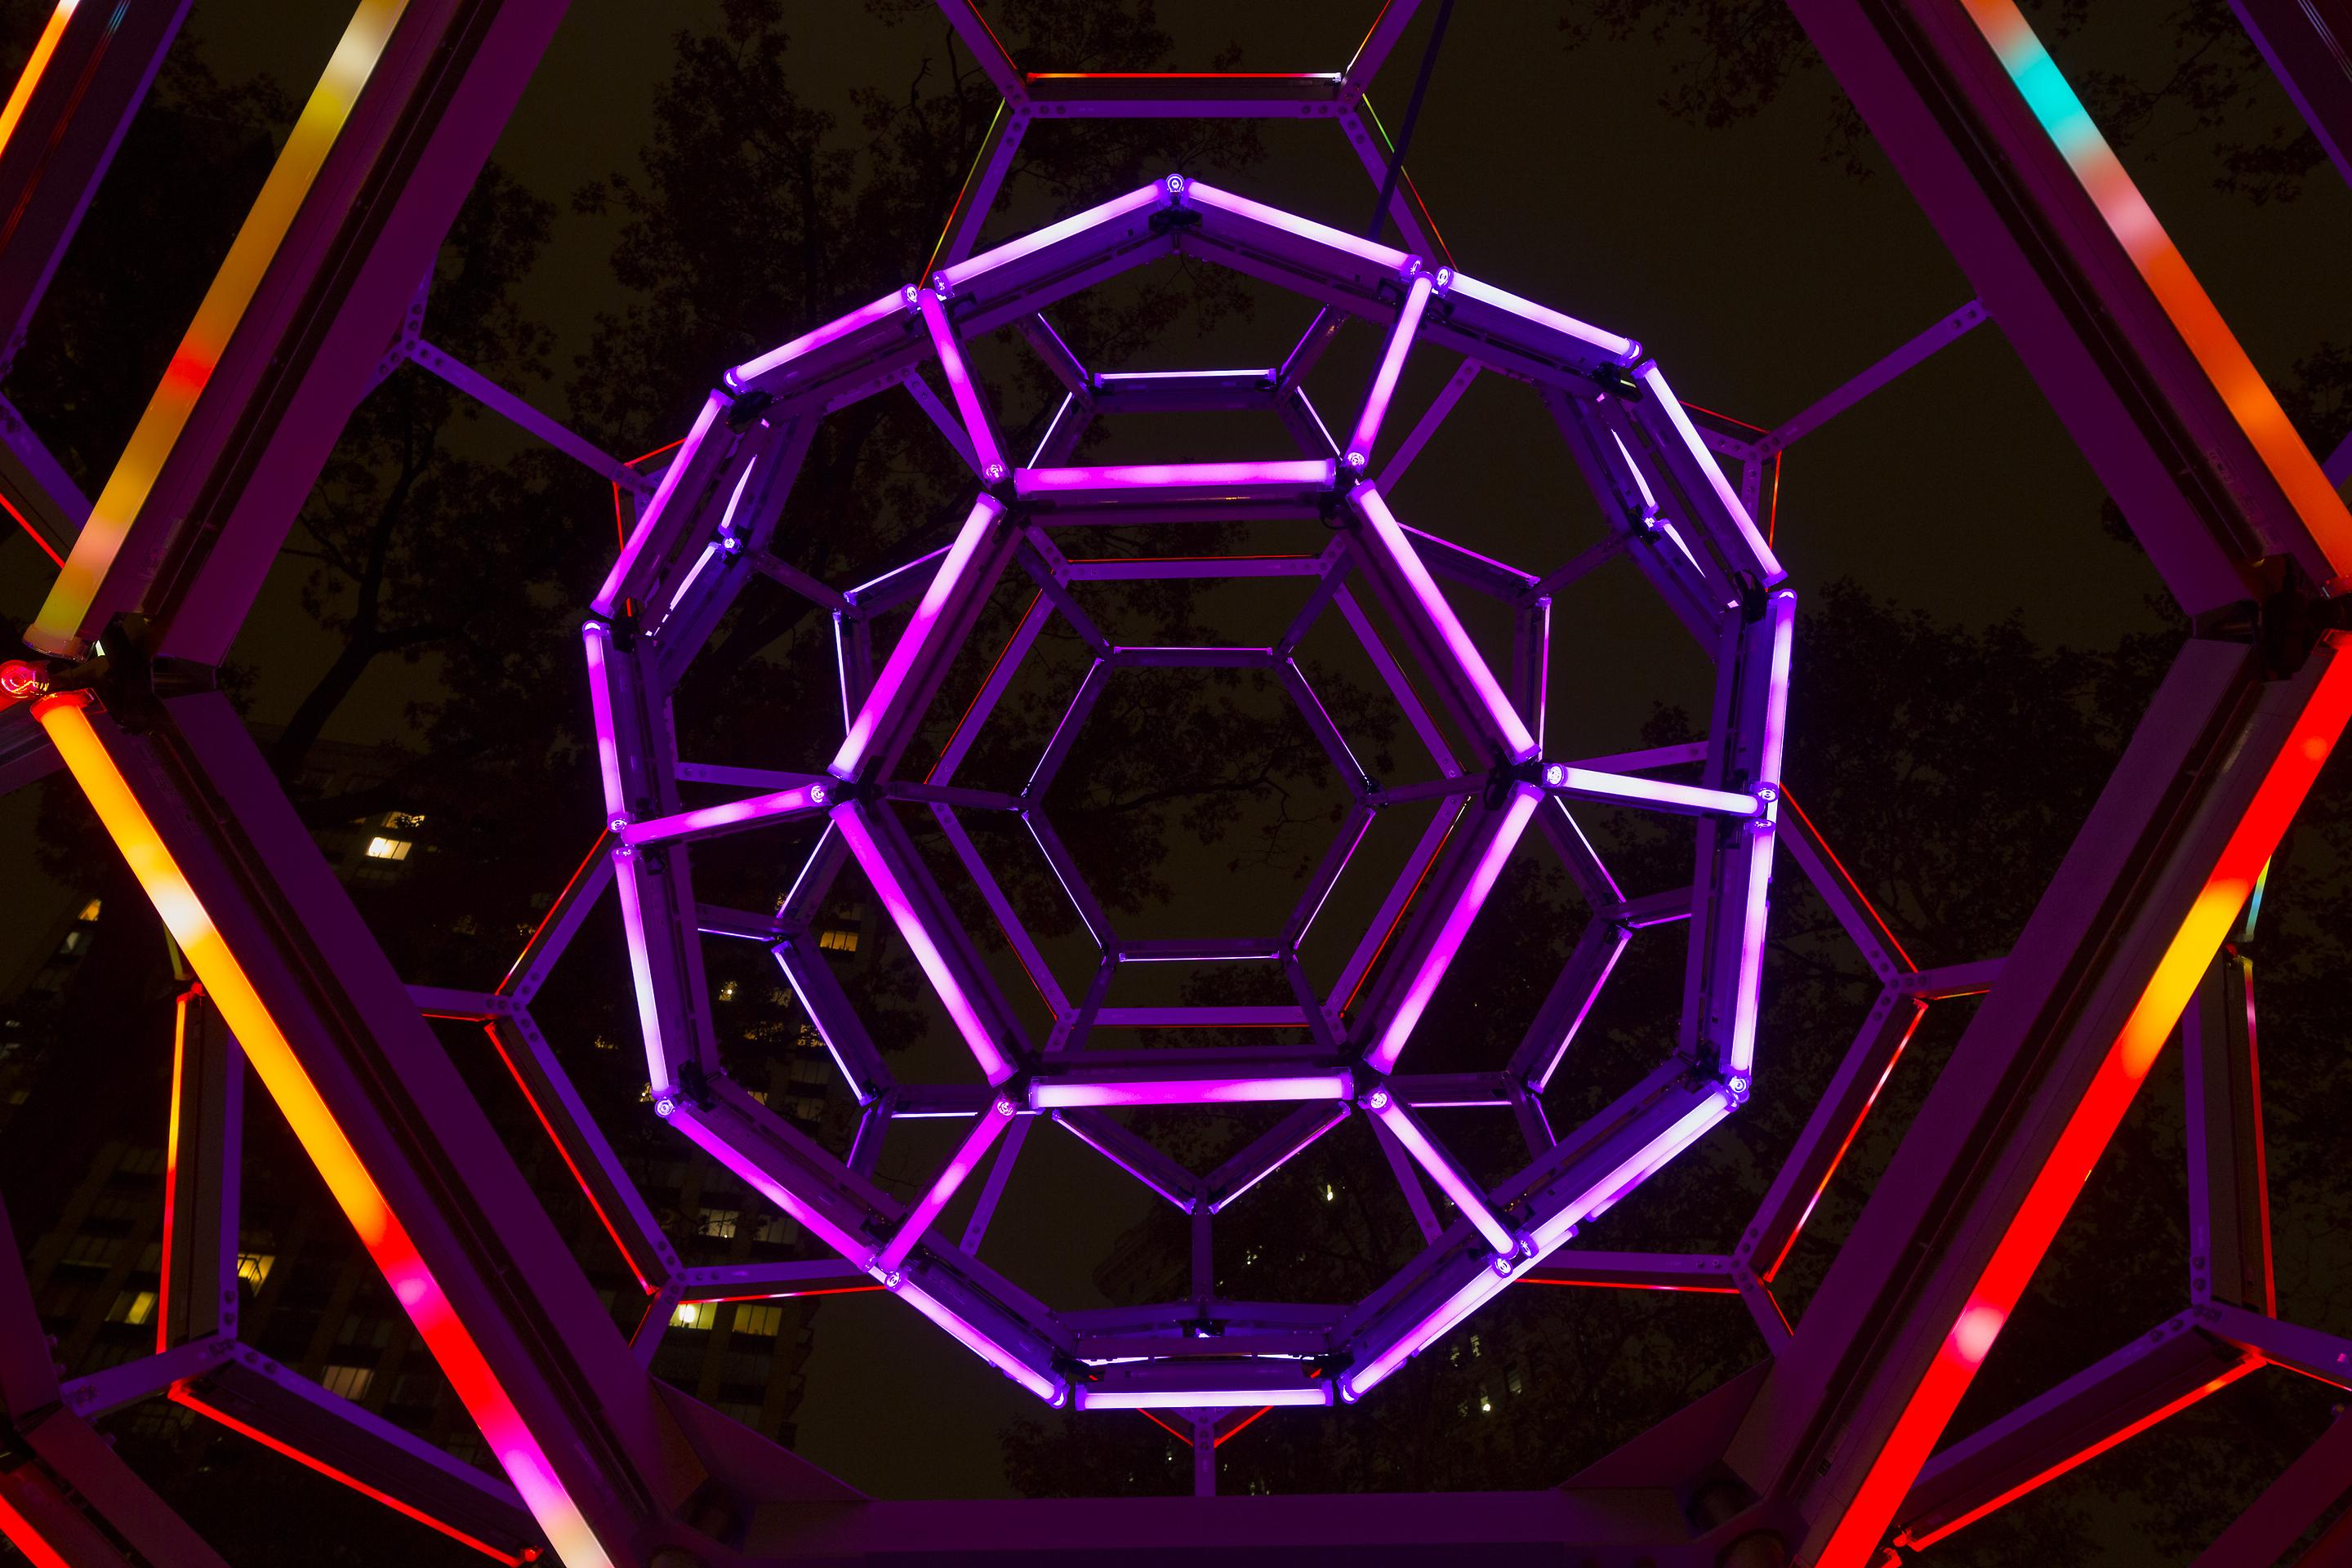 Buckyball, 2012
LEDs, custom software, electrical hardware, metal armature, sculptural base
360 x 240 x 240 inches
Unique
Installation: Madison Square Park, New York, NY